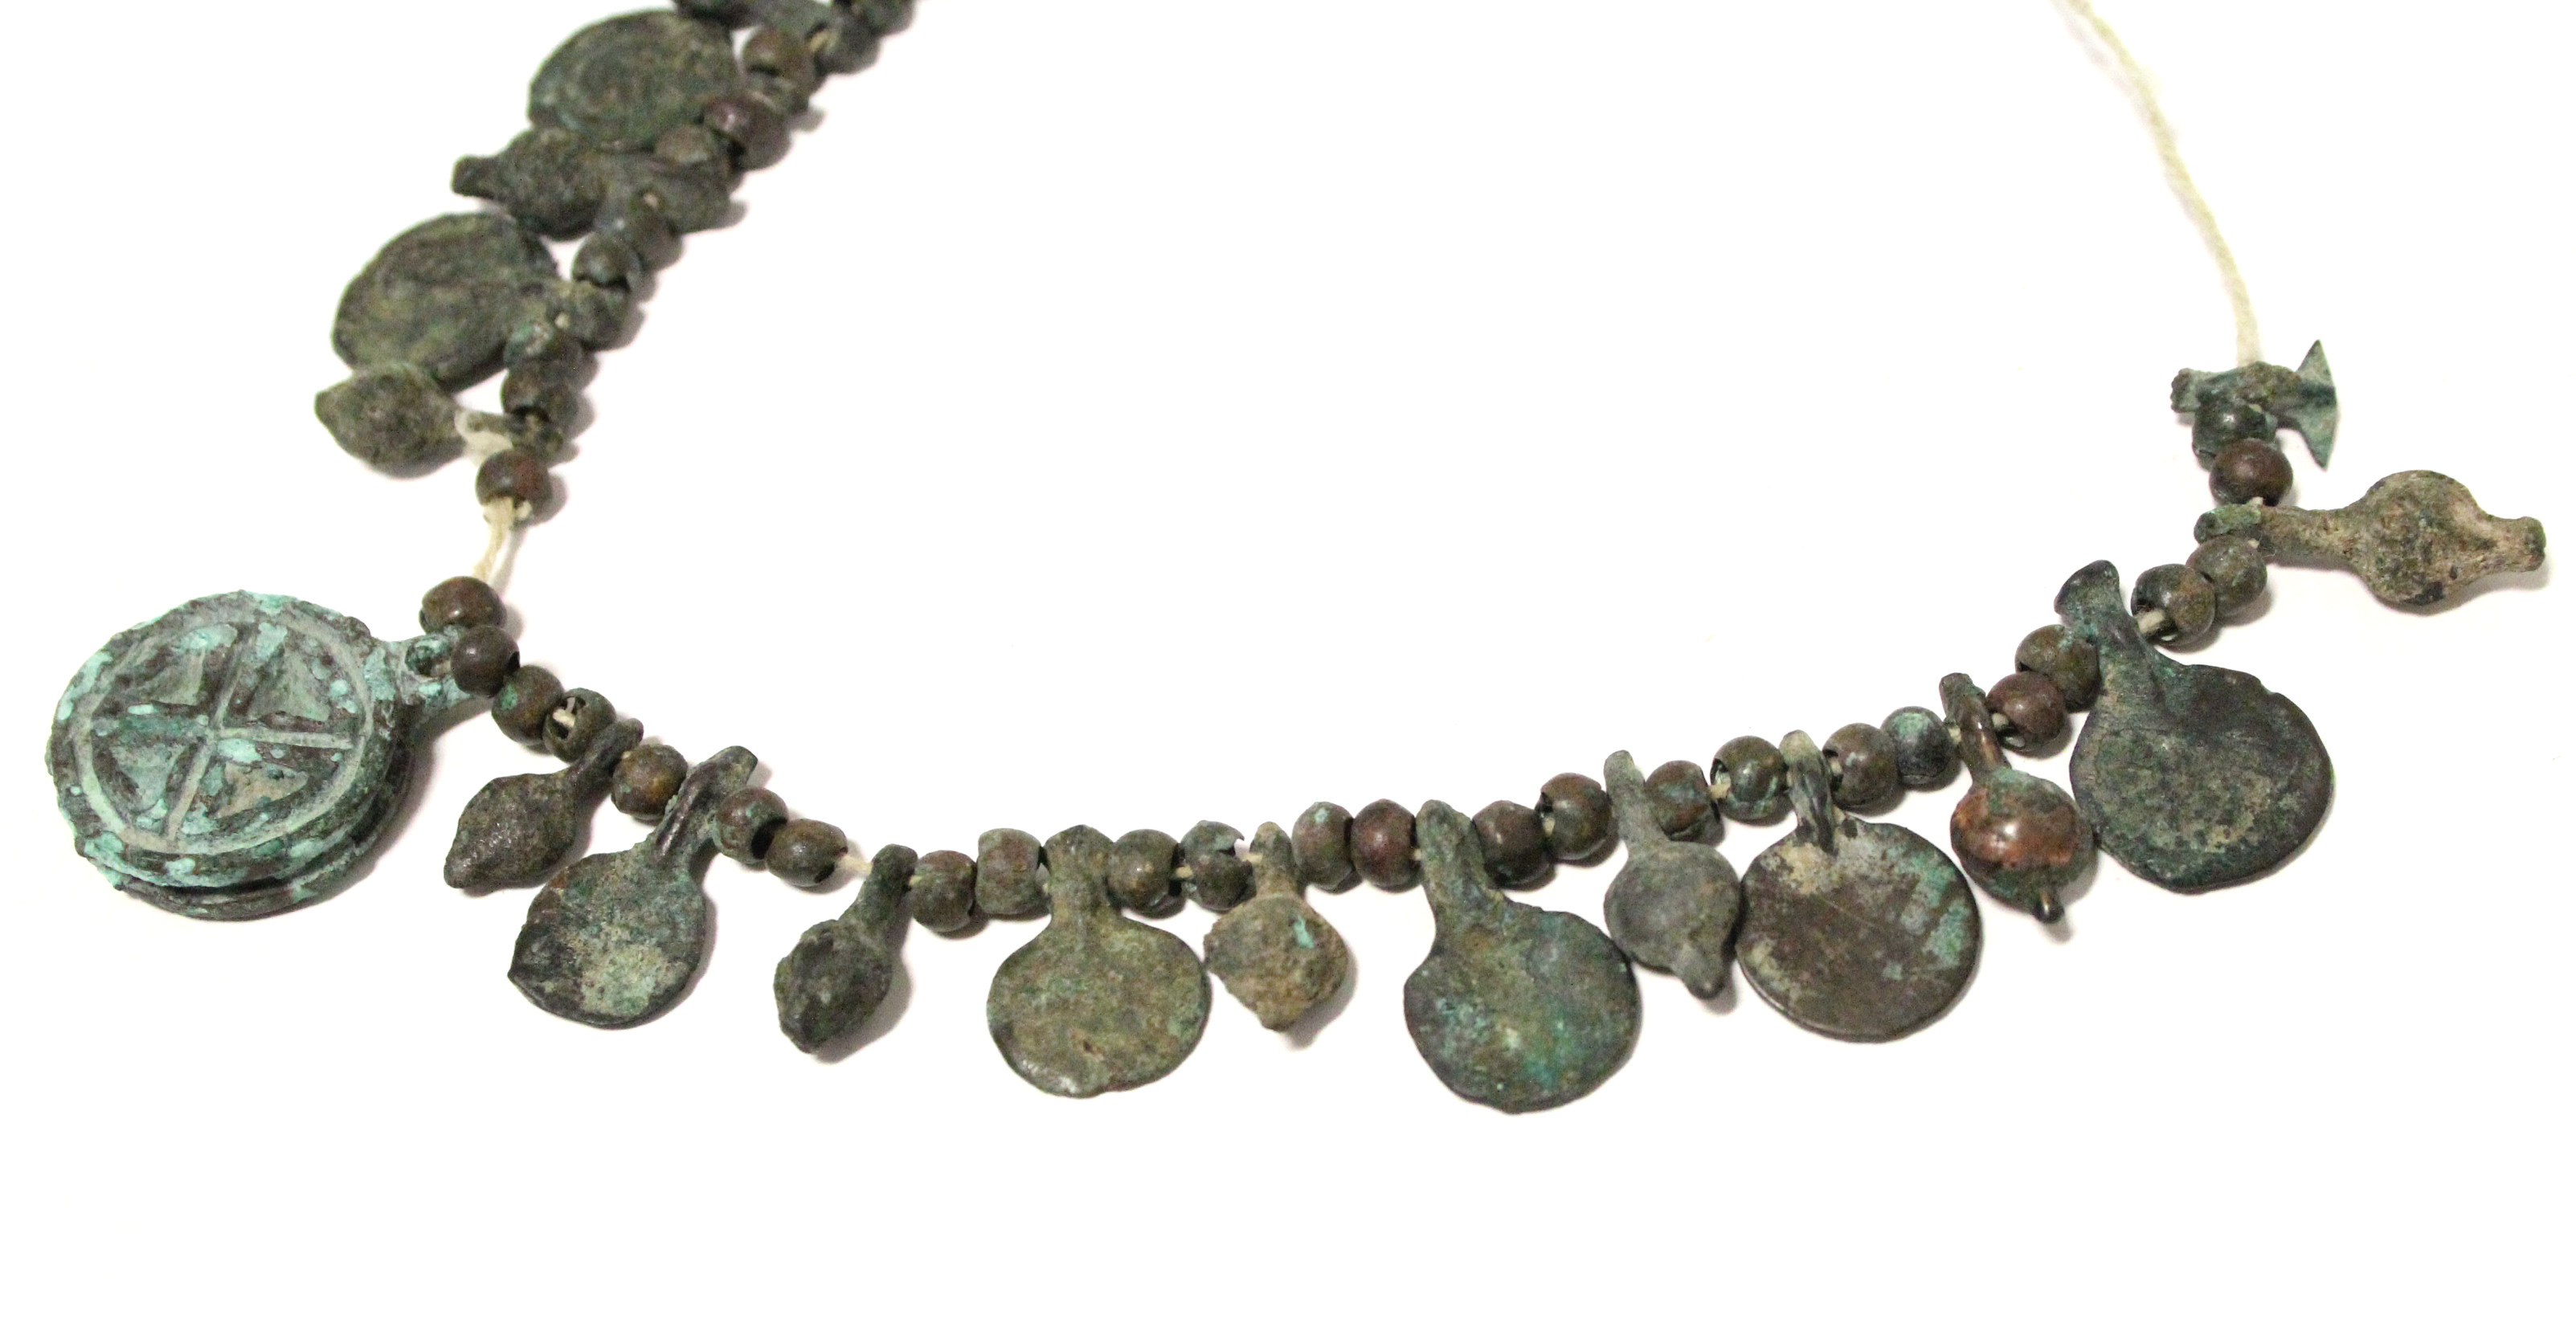 A Byzantine bronze necklace of decorated flat circular panels with small plain beads in between. - Image 3 of 3